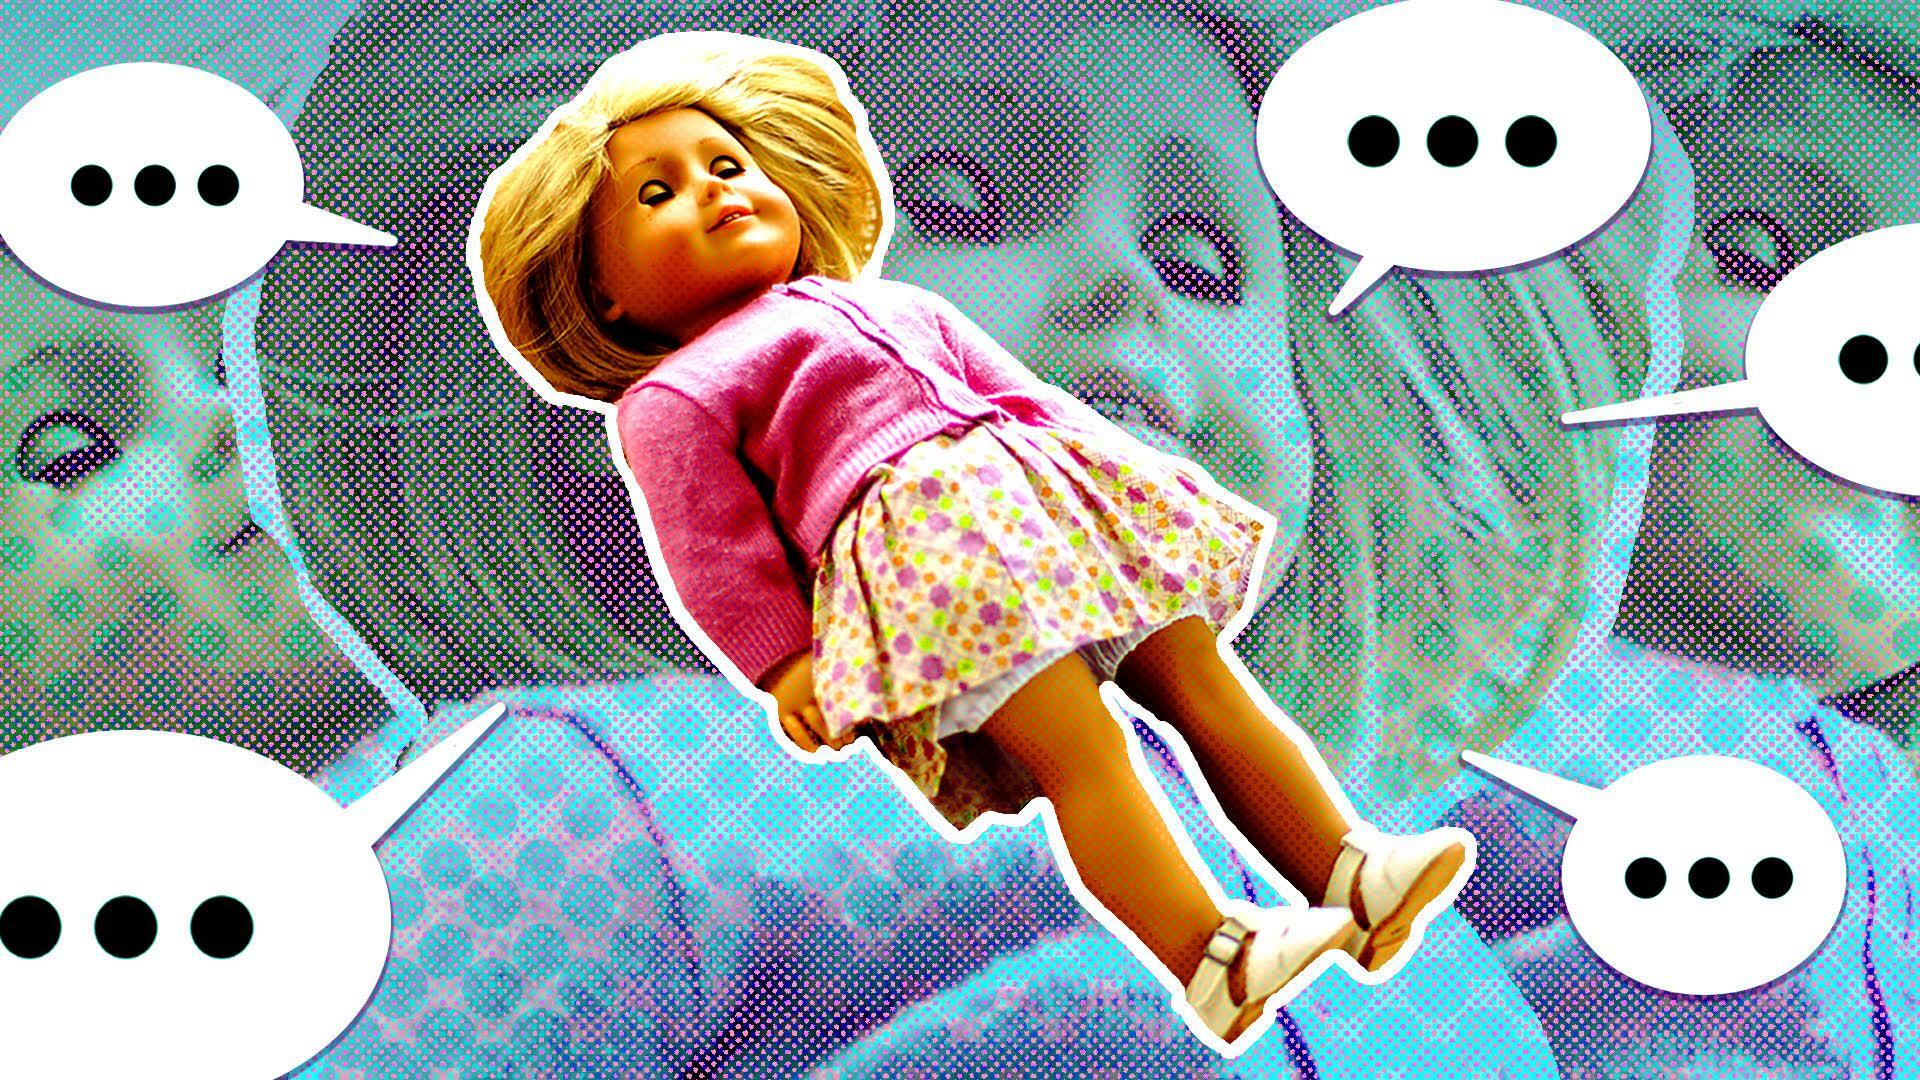 The American Girl doll Kit Kittredge suspended in space surrounded by chat bubbles. 